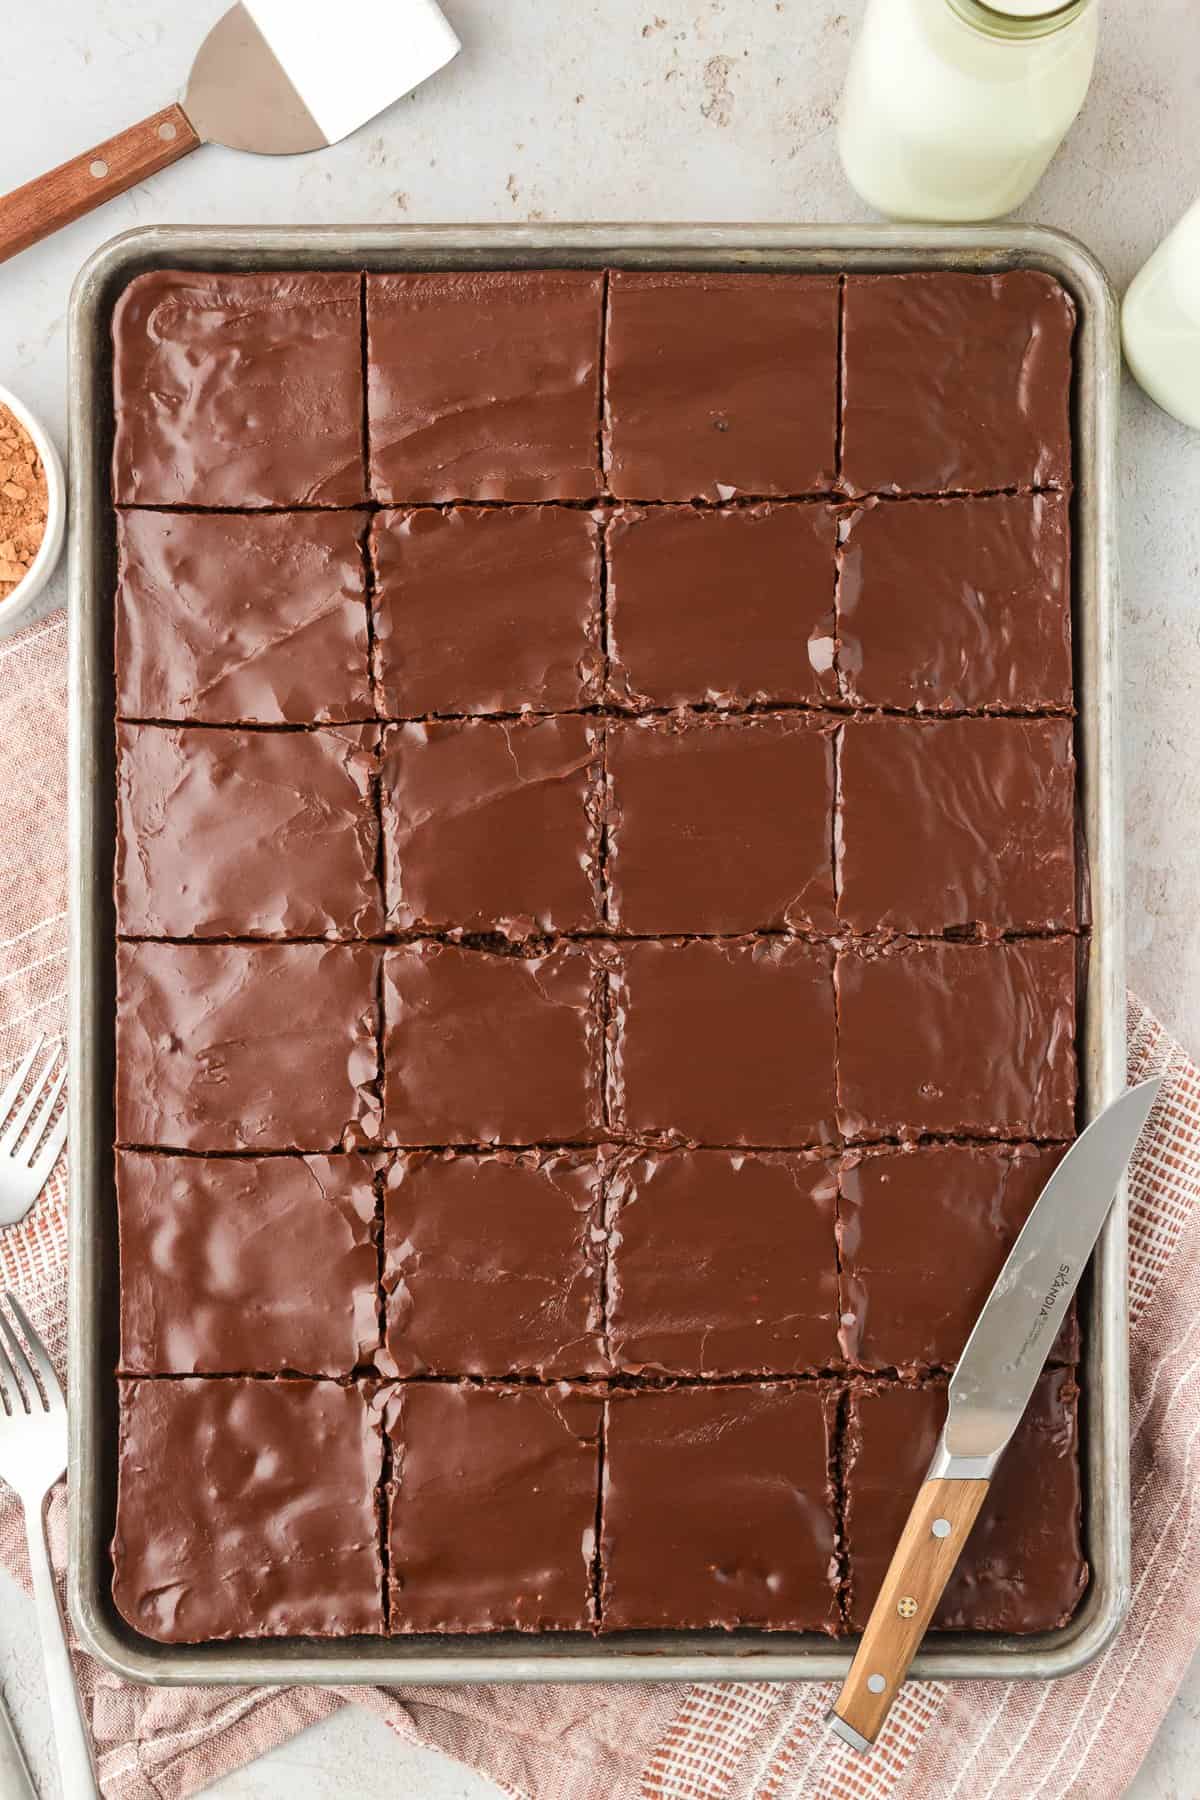 a sheet pan of texas sheet cake cut into squares with a knife resting on it, a spatula, milk, bowl of cocoa powder, fork, and tan kitchen towel around it